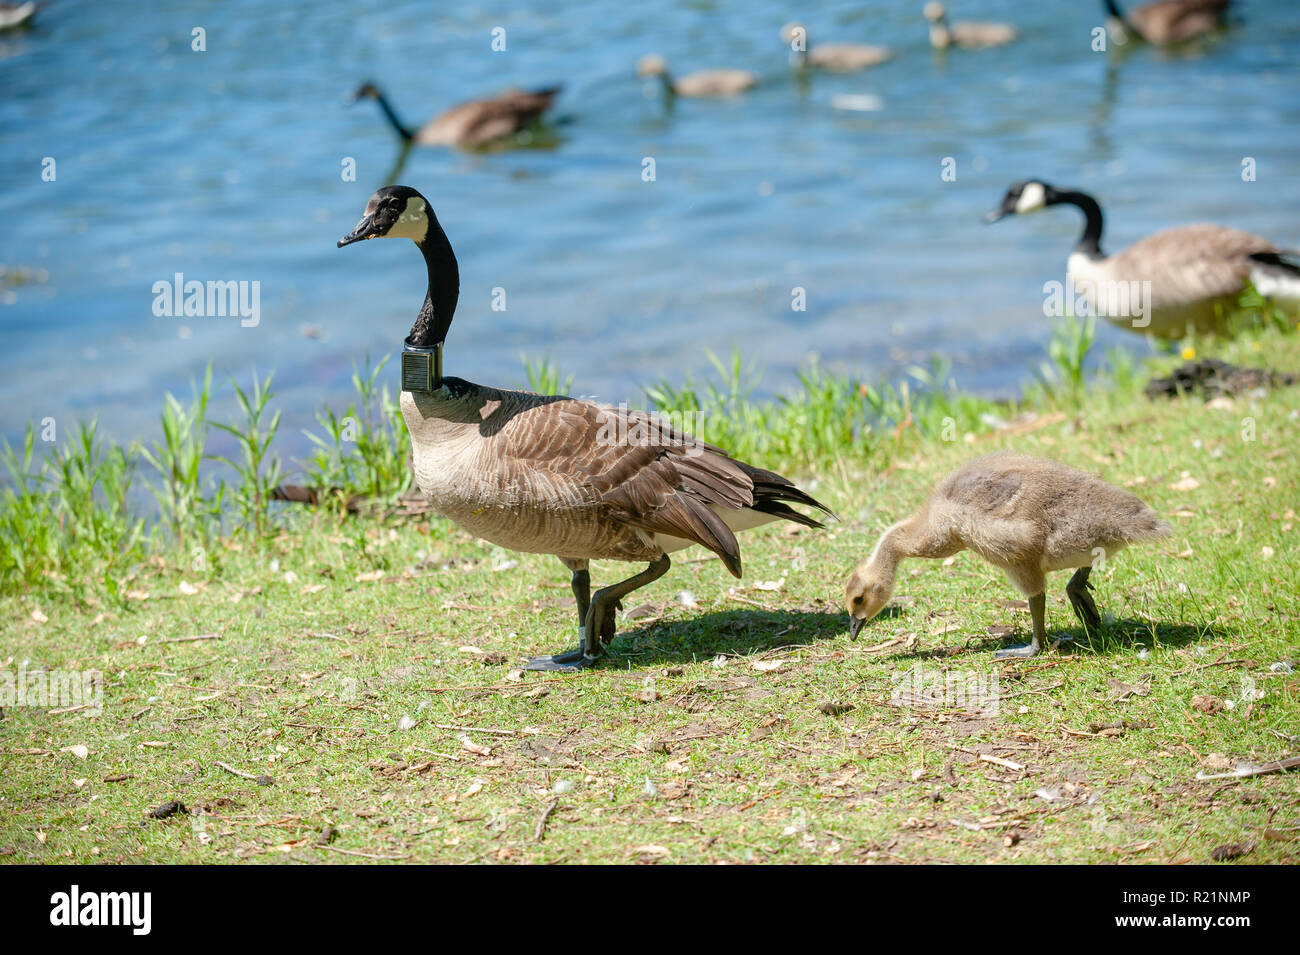 Canada Geese, (Branta canadensis), parent with young, Toronto Island Toronto. Adult has radio tracking collar on neck Stock Photo